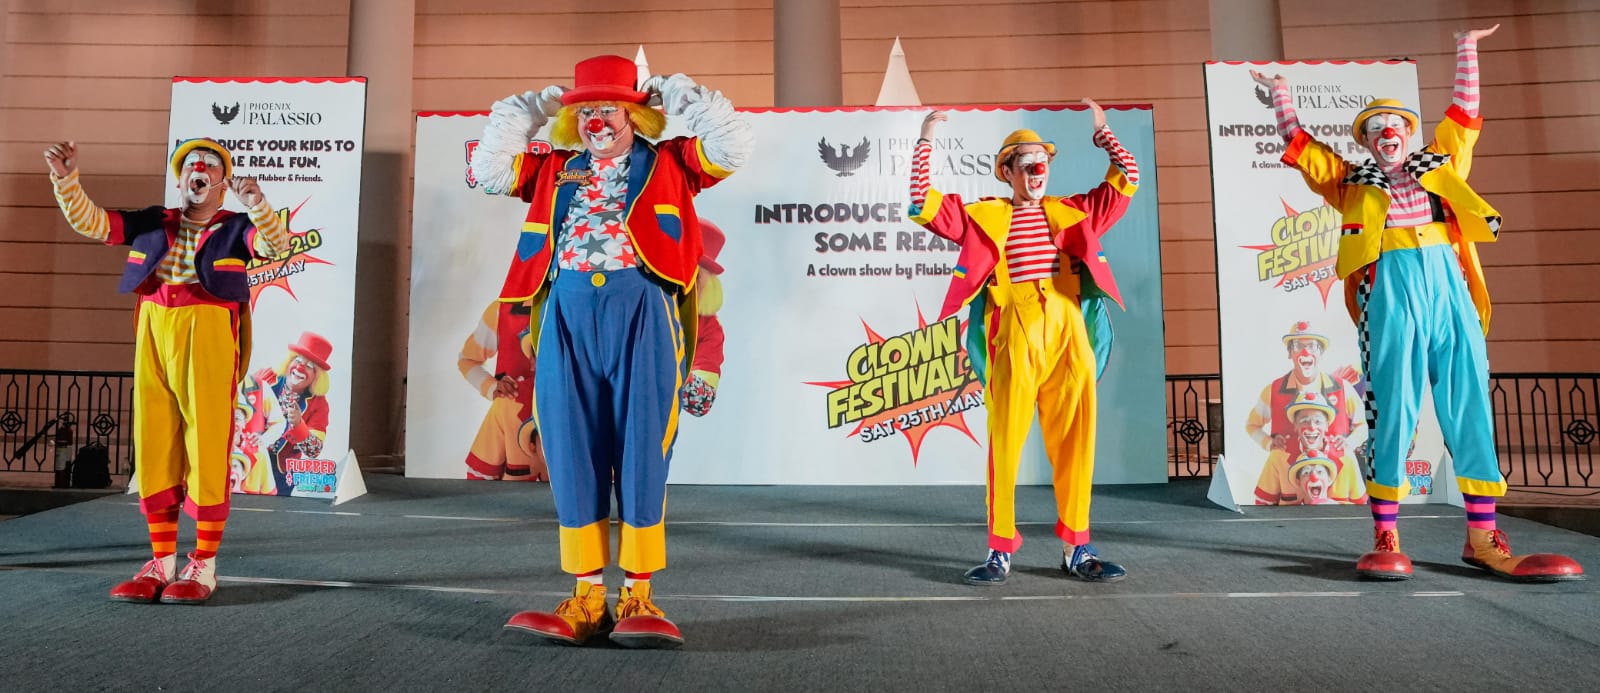 Phoenix Palassio Hosts Clown Fest 2.0 with Flubber and Friends